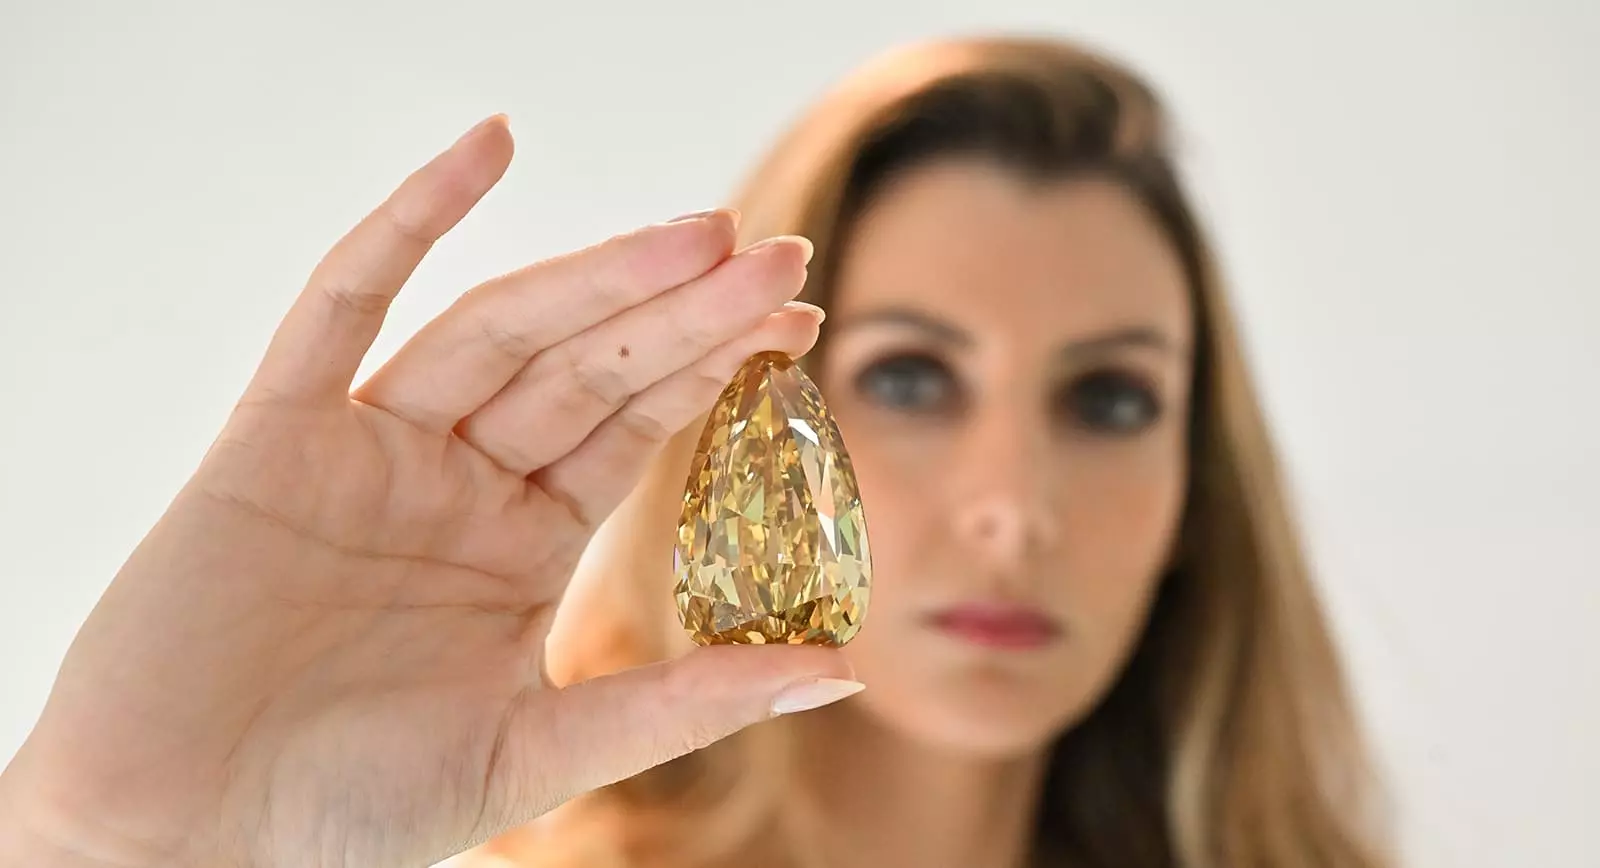 The Golden Canary, a 303.10 carat Fancy Deep Brownish-Yellow Diamond to be auctioned by Sotheby's in New York on Dec 7, pic by Cedric Ribeiro 6 banner